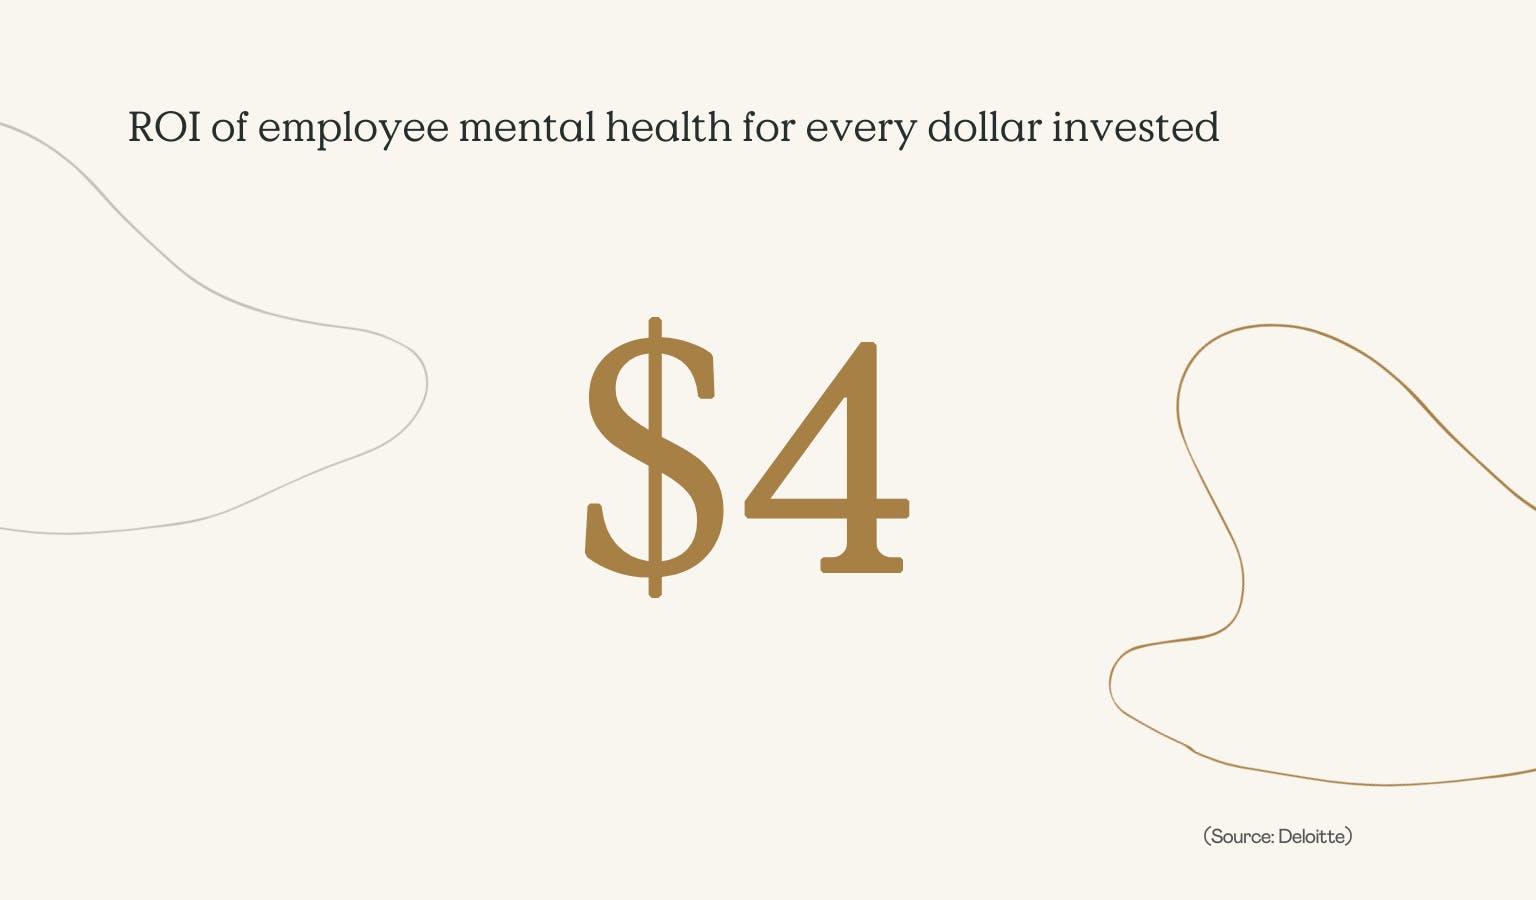 The return of investment (ROI) in employee mental health: 4 dollars for every dollar spent. Frankie Health